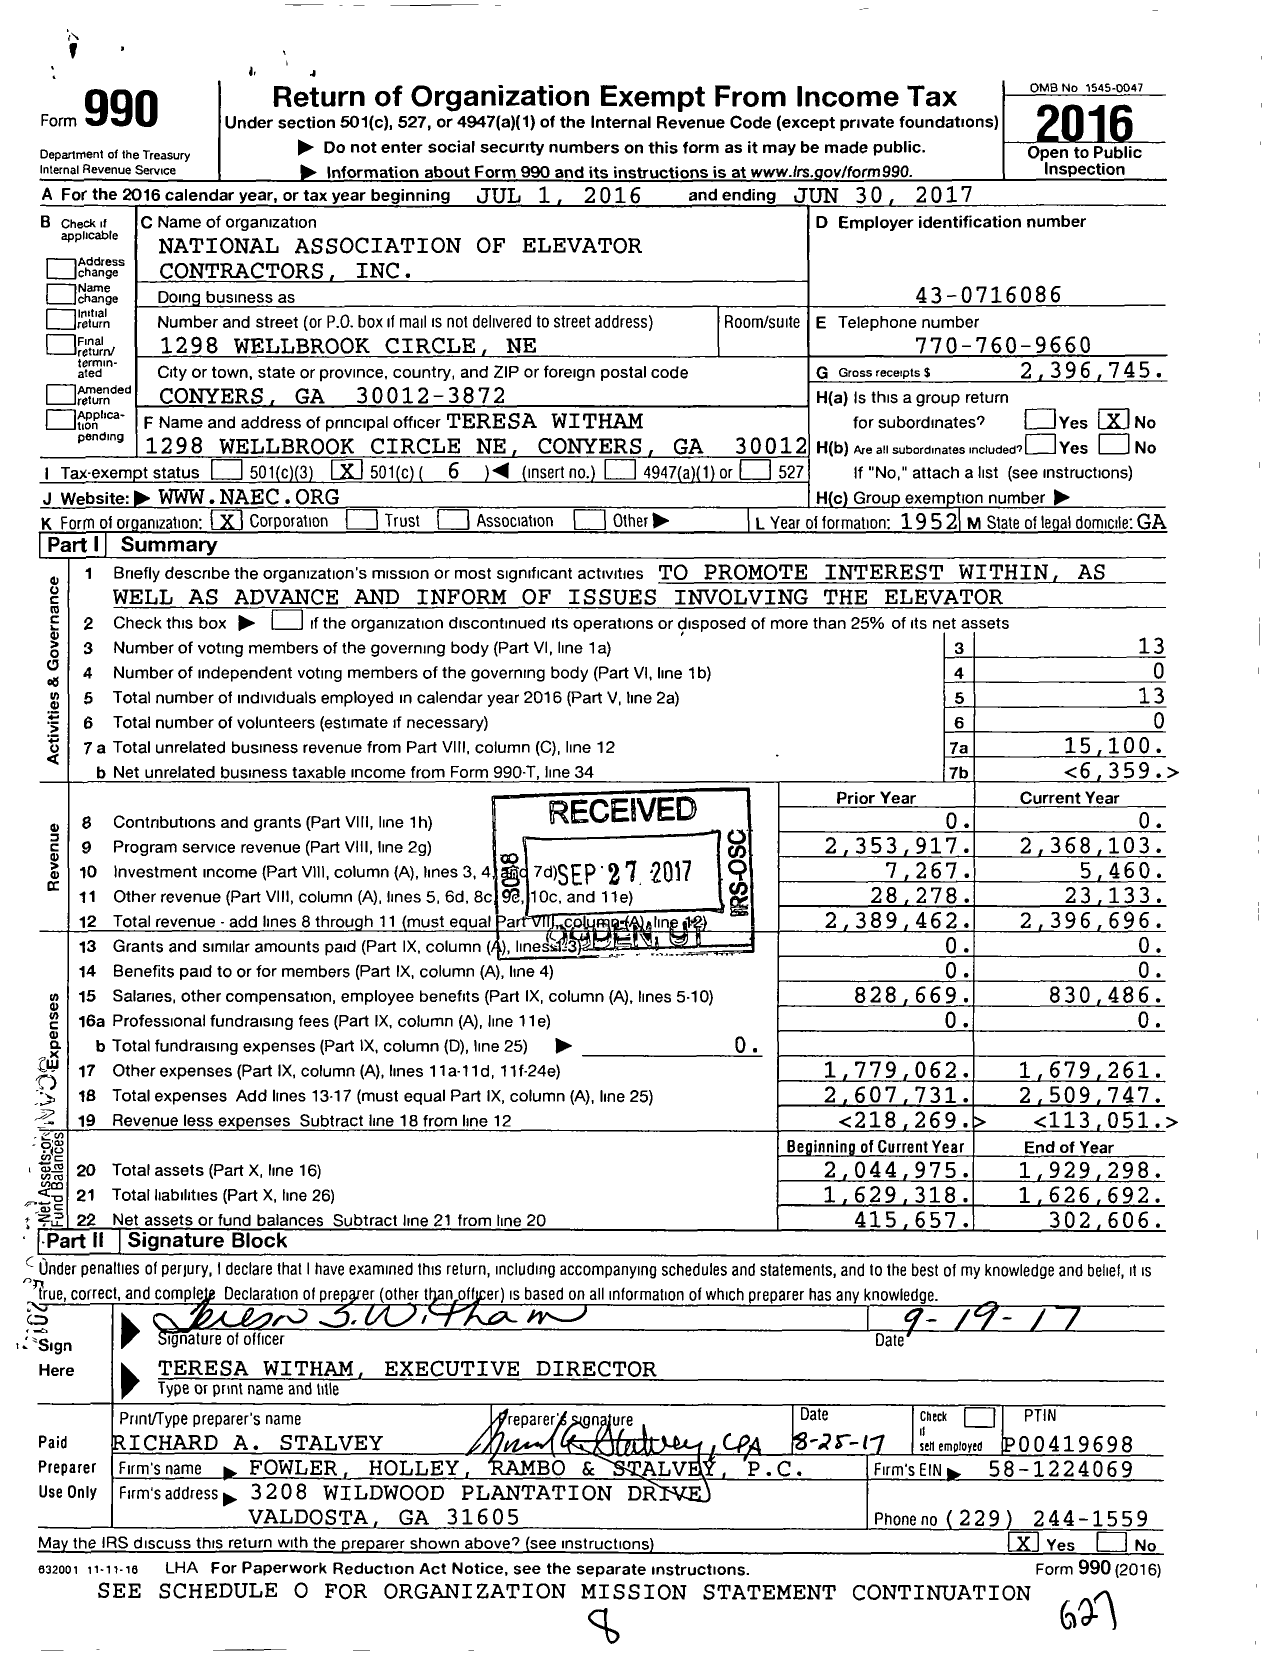 Image of first page of 2016 Form 990O for National Association of Elevator Contractors (NAEC)